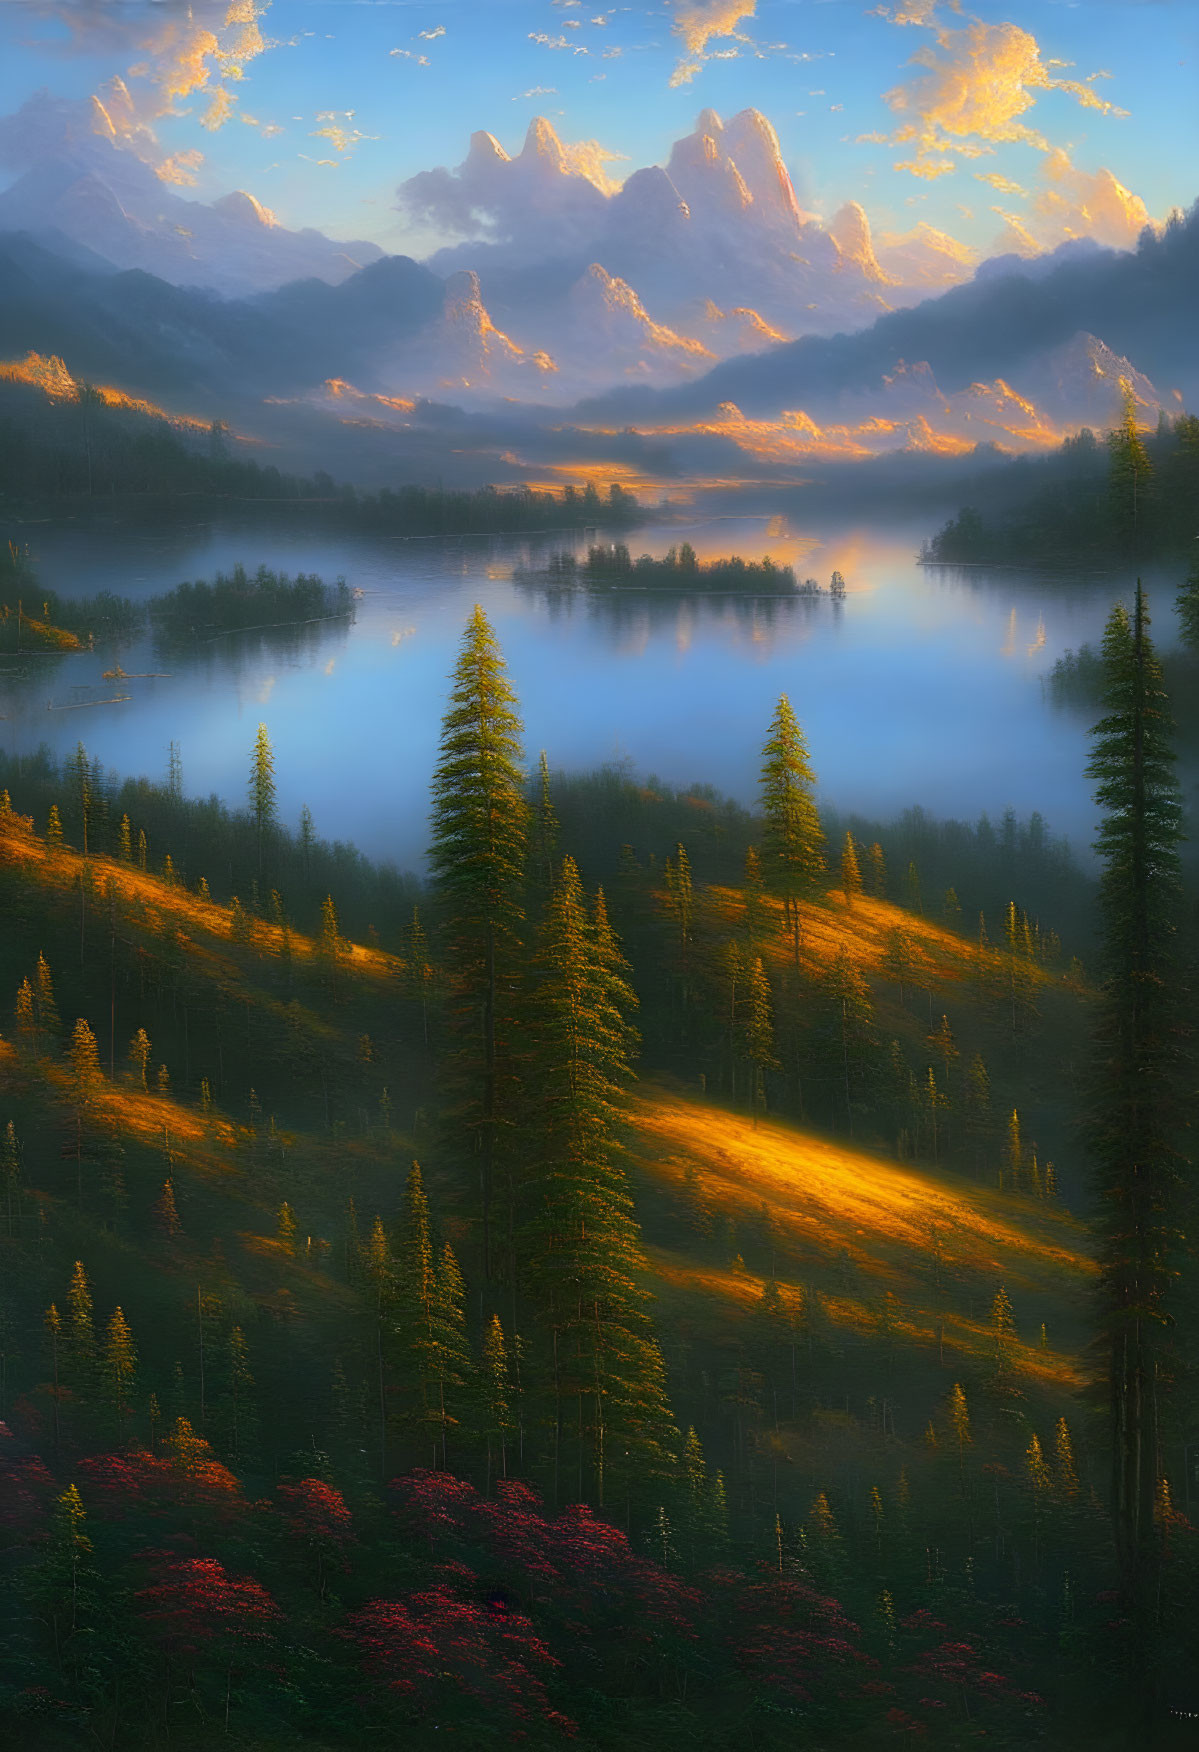 Misty lake sunrise with mountains and trees